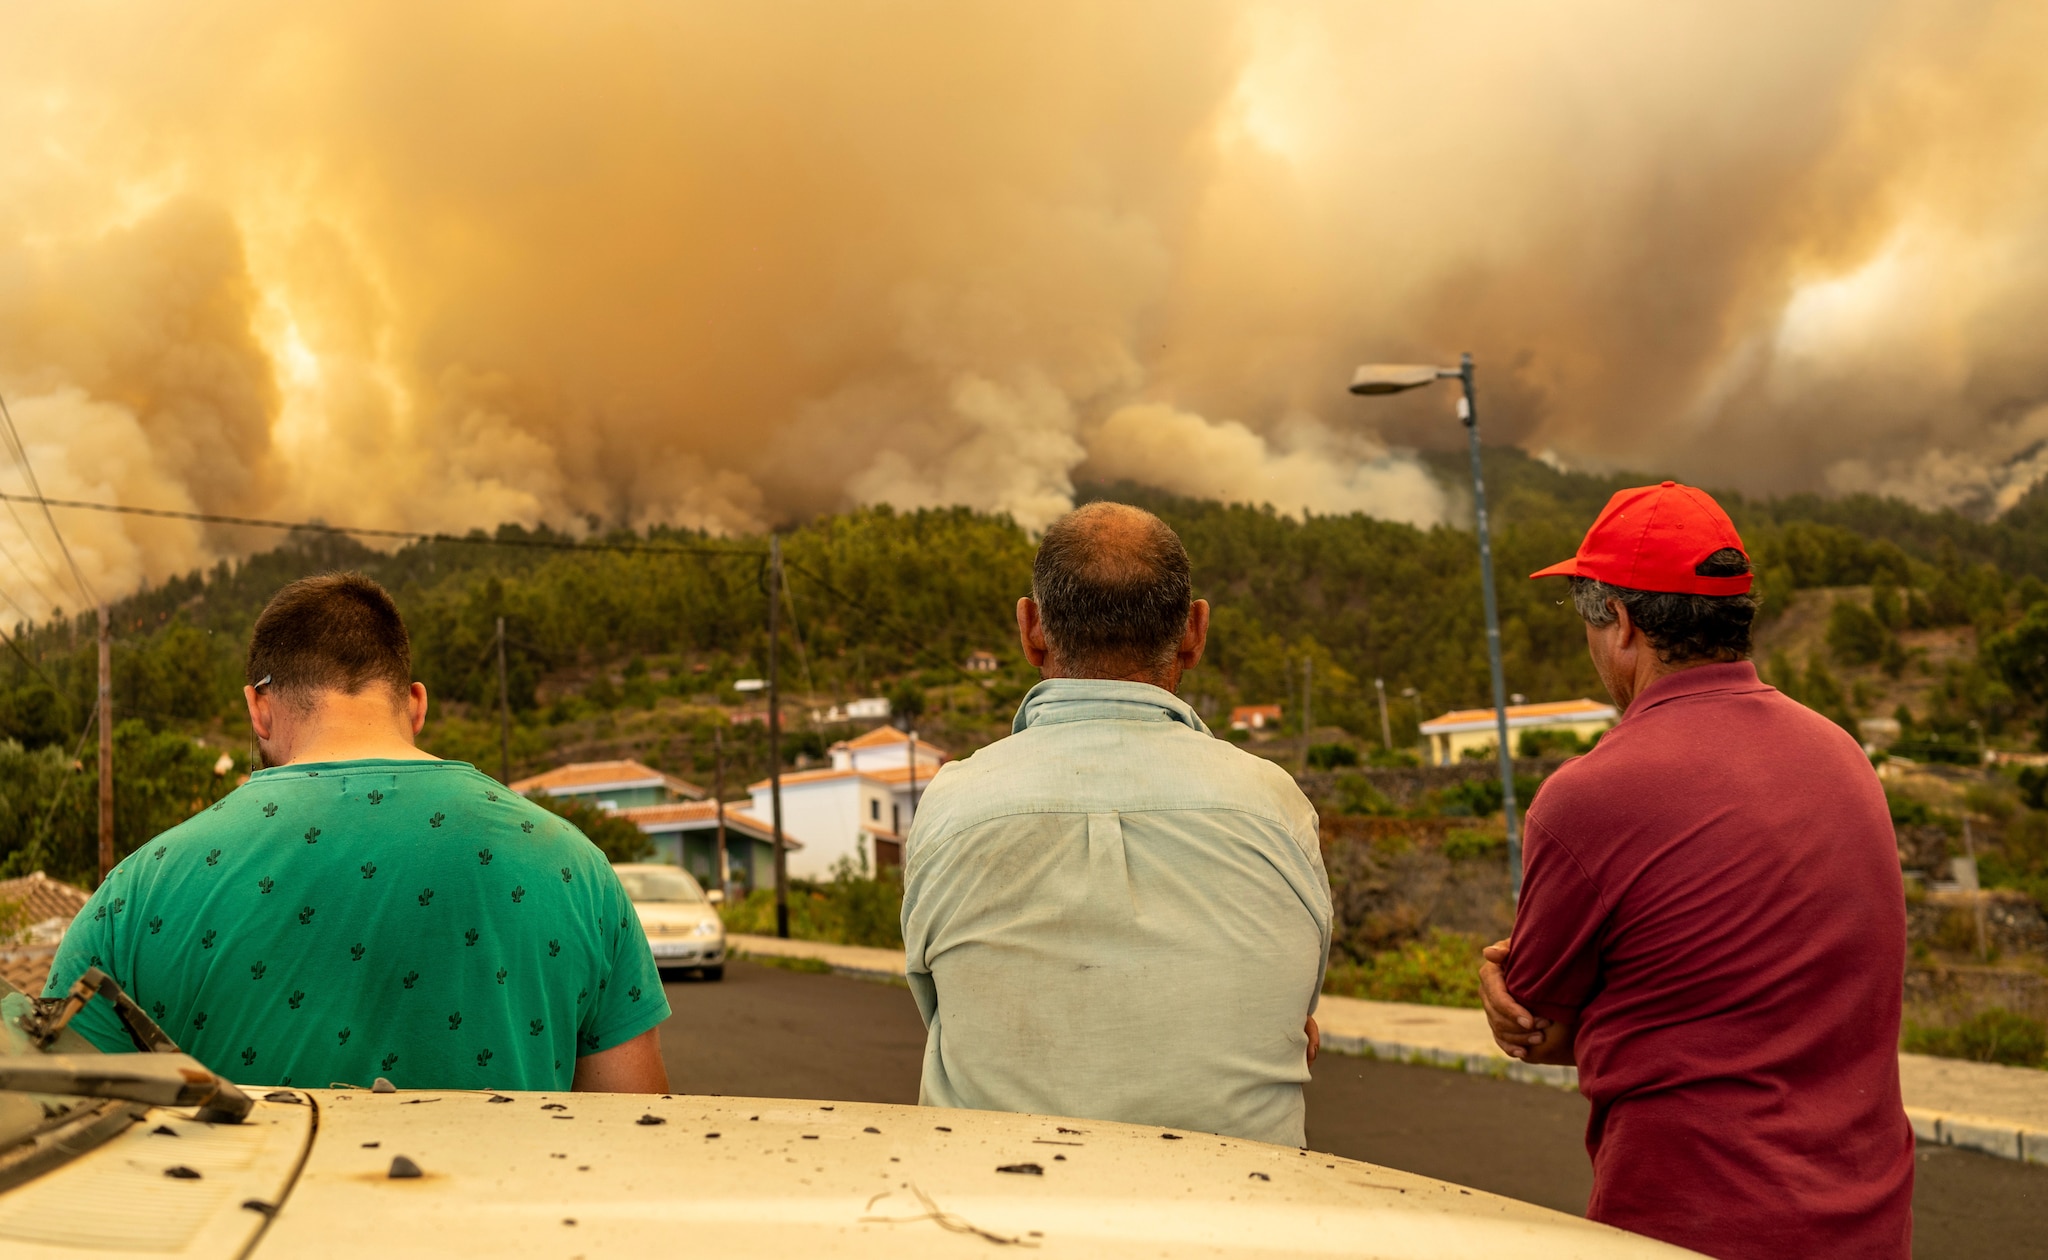 More than 4,000 people have been evacuated from the wildfires in La Palma